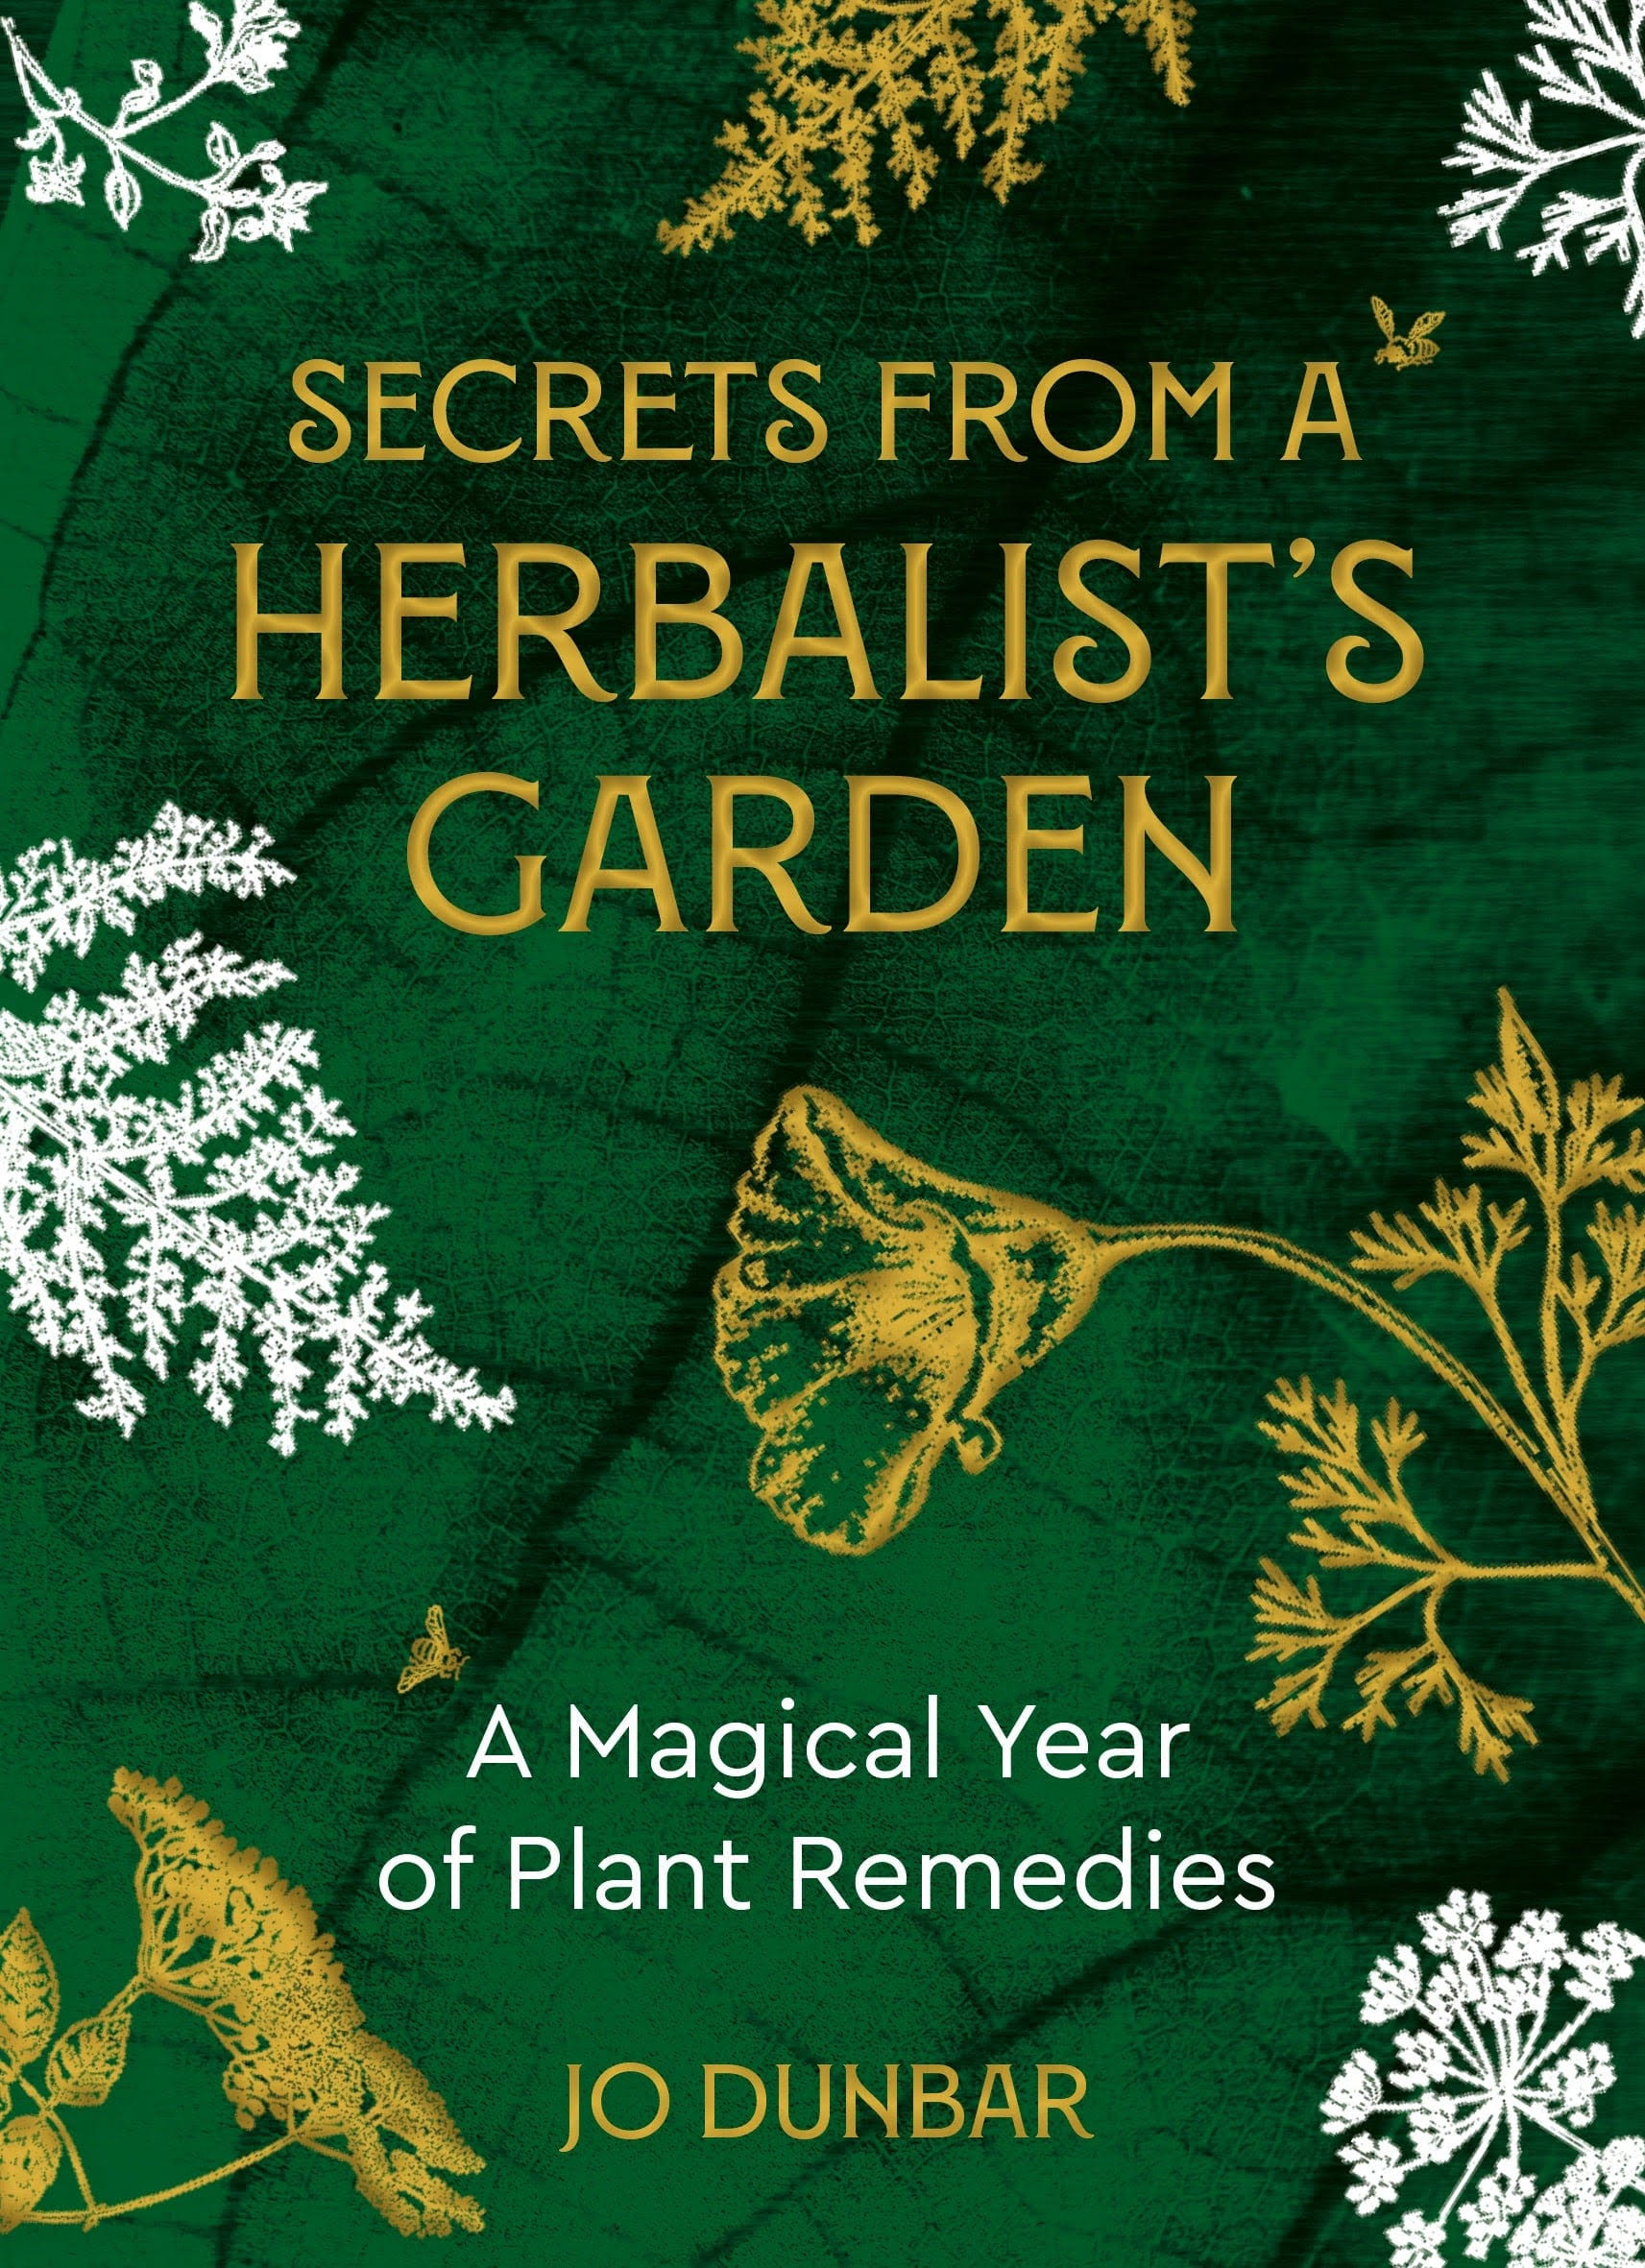 Secrets From A Herbalist's Garden: A Magical Year of Plant Remedies [Book]